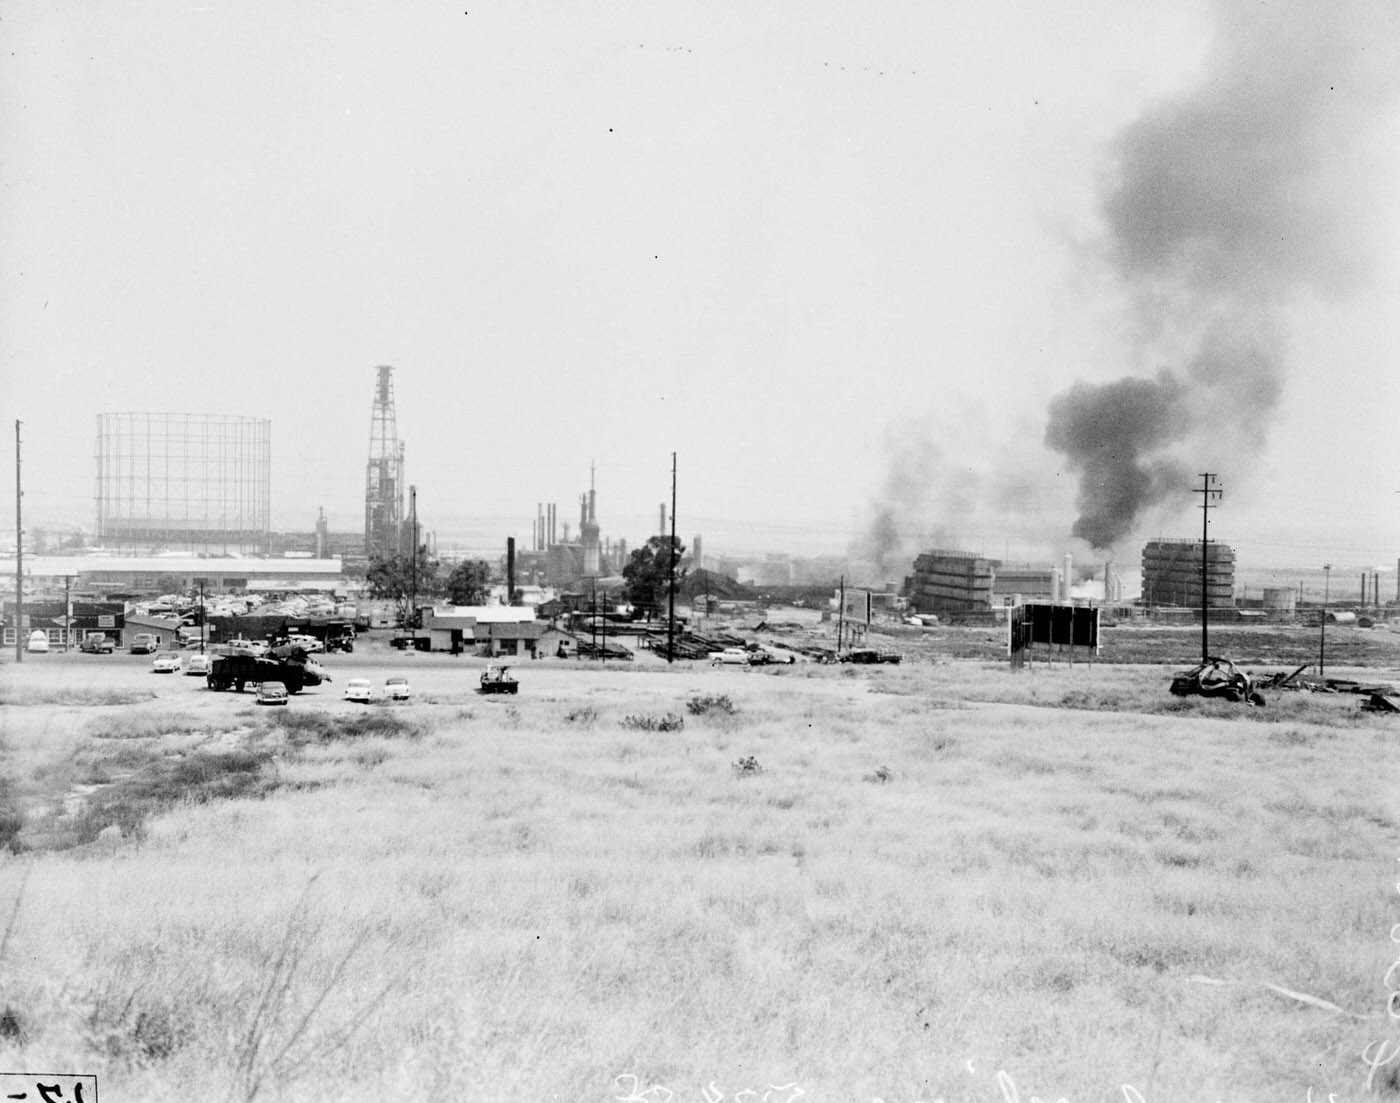 The 1958 Hancock Oil Refinery Fire on Signal Hill: A Catastrophic Day That Changed Safety Regulations